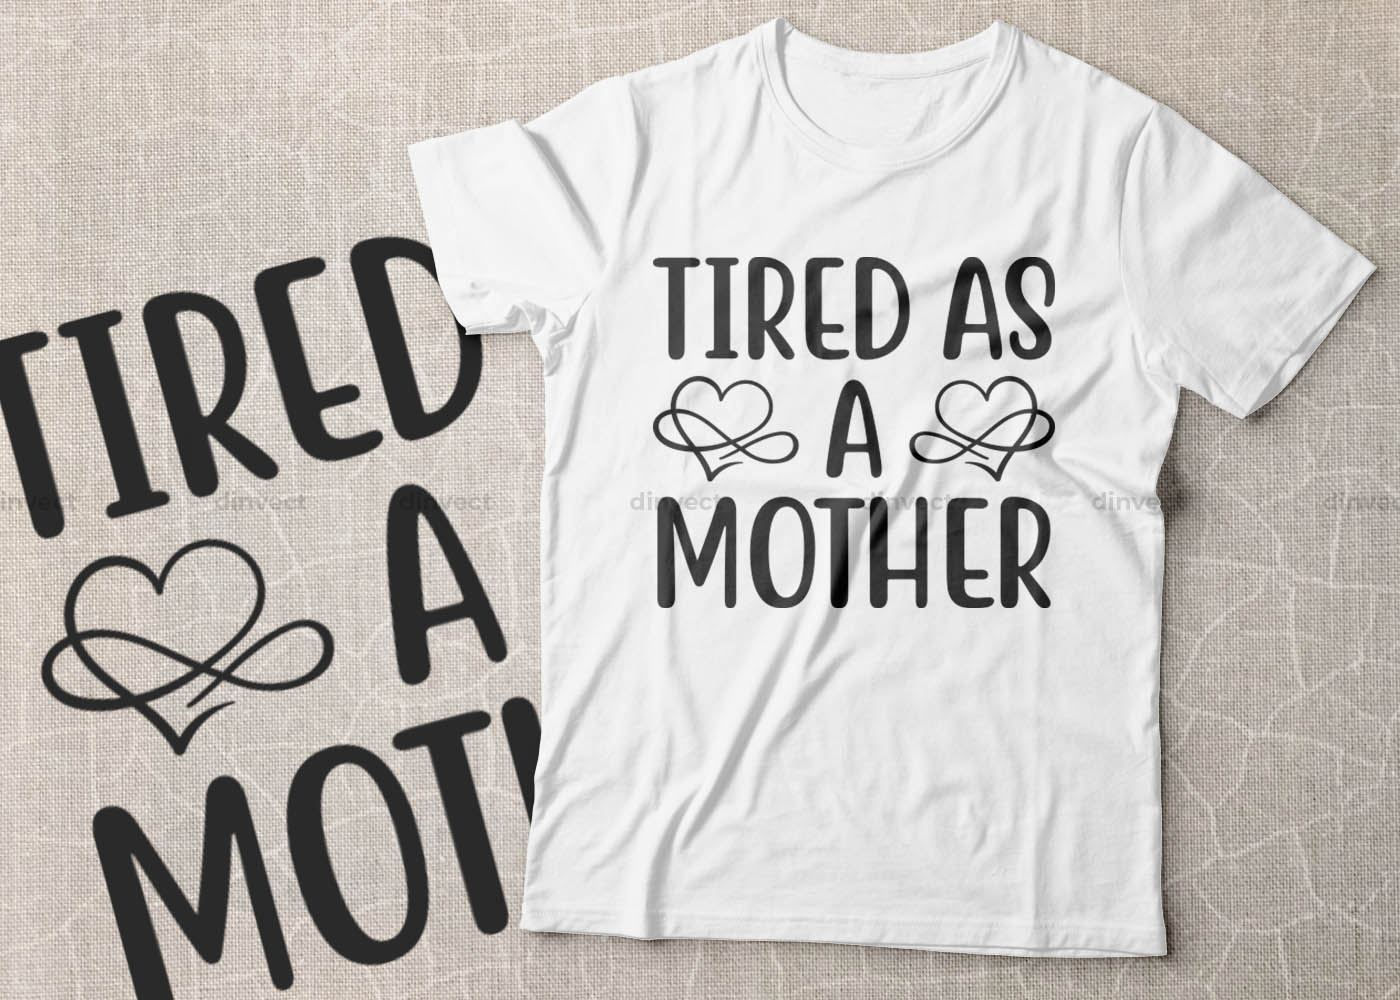 Tired As A Mother Svg Mom Svg Mothers Day T Shirt Design Happy Mothers Day Svg Mother S Day Cricut Files Mom Gift Cameo Vinyl Designs Iron On Decals Cricut Cut Files Svg Eps